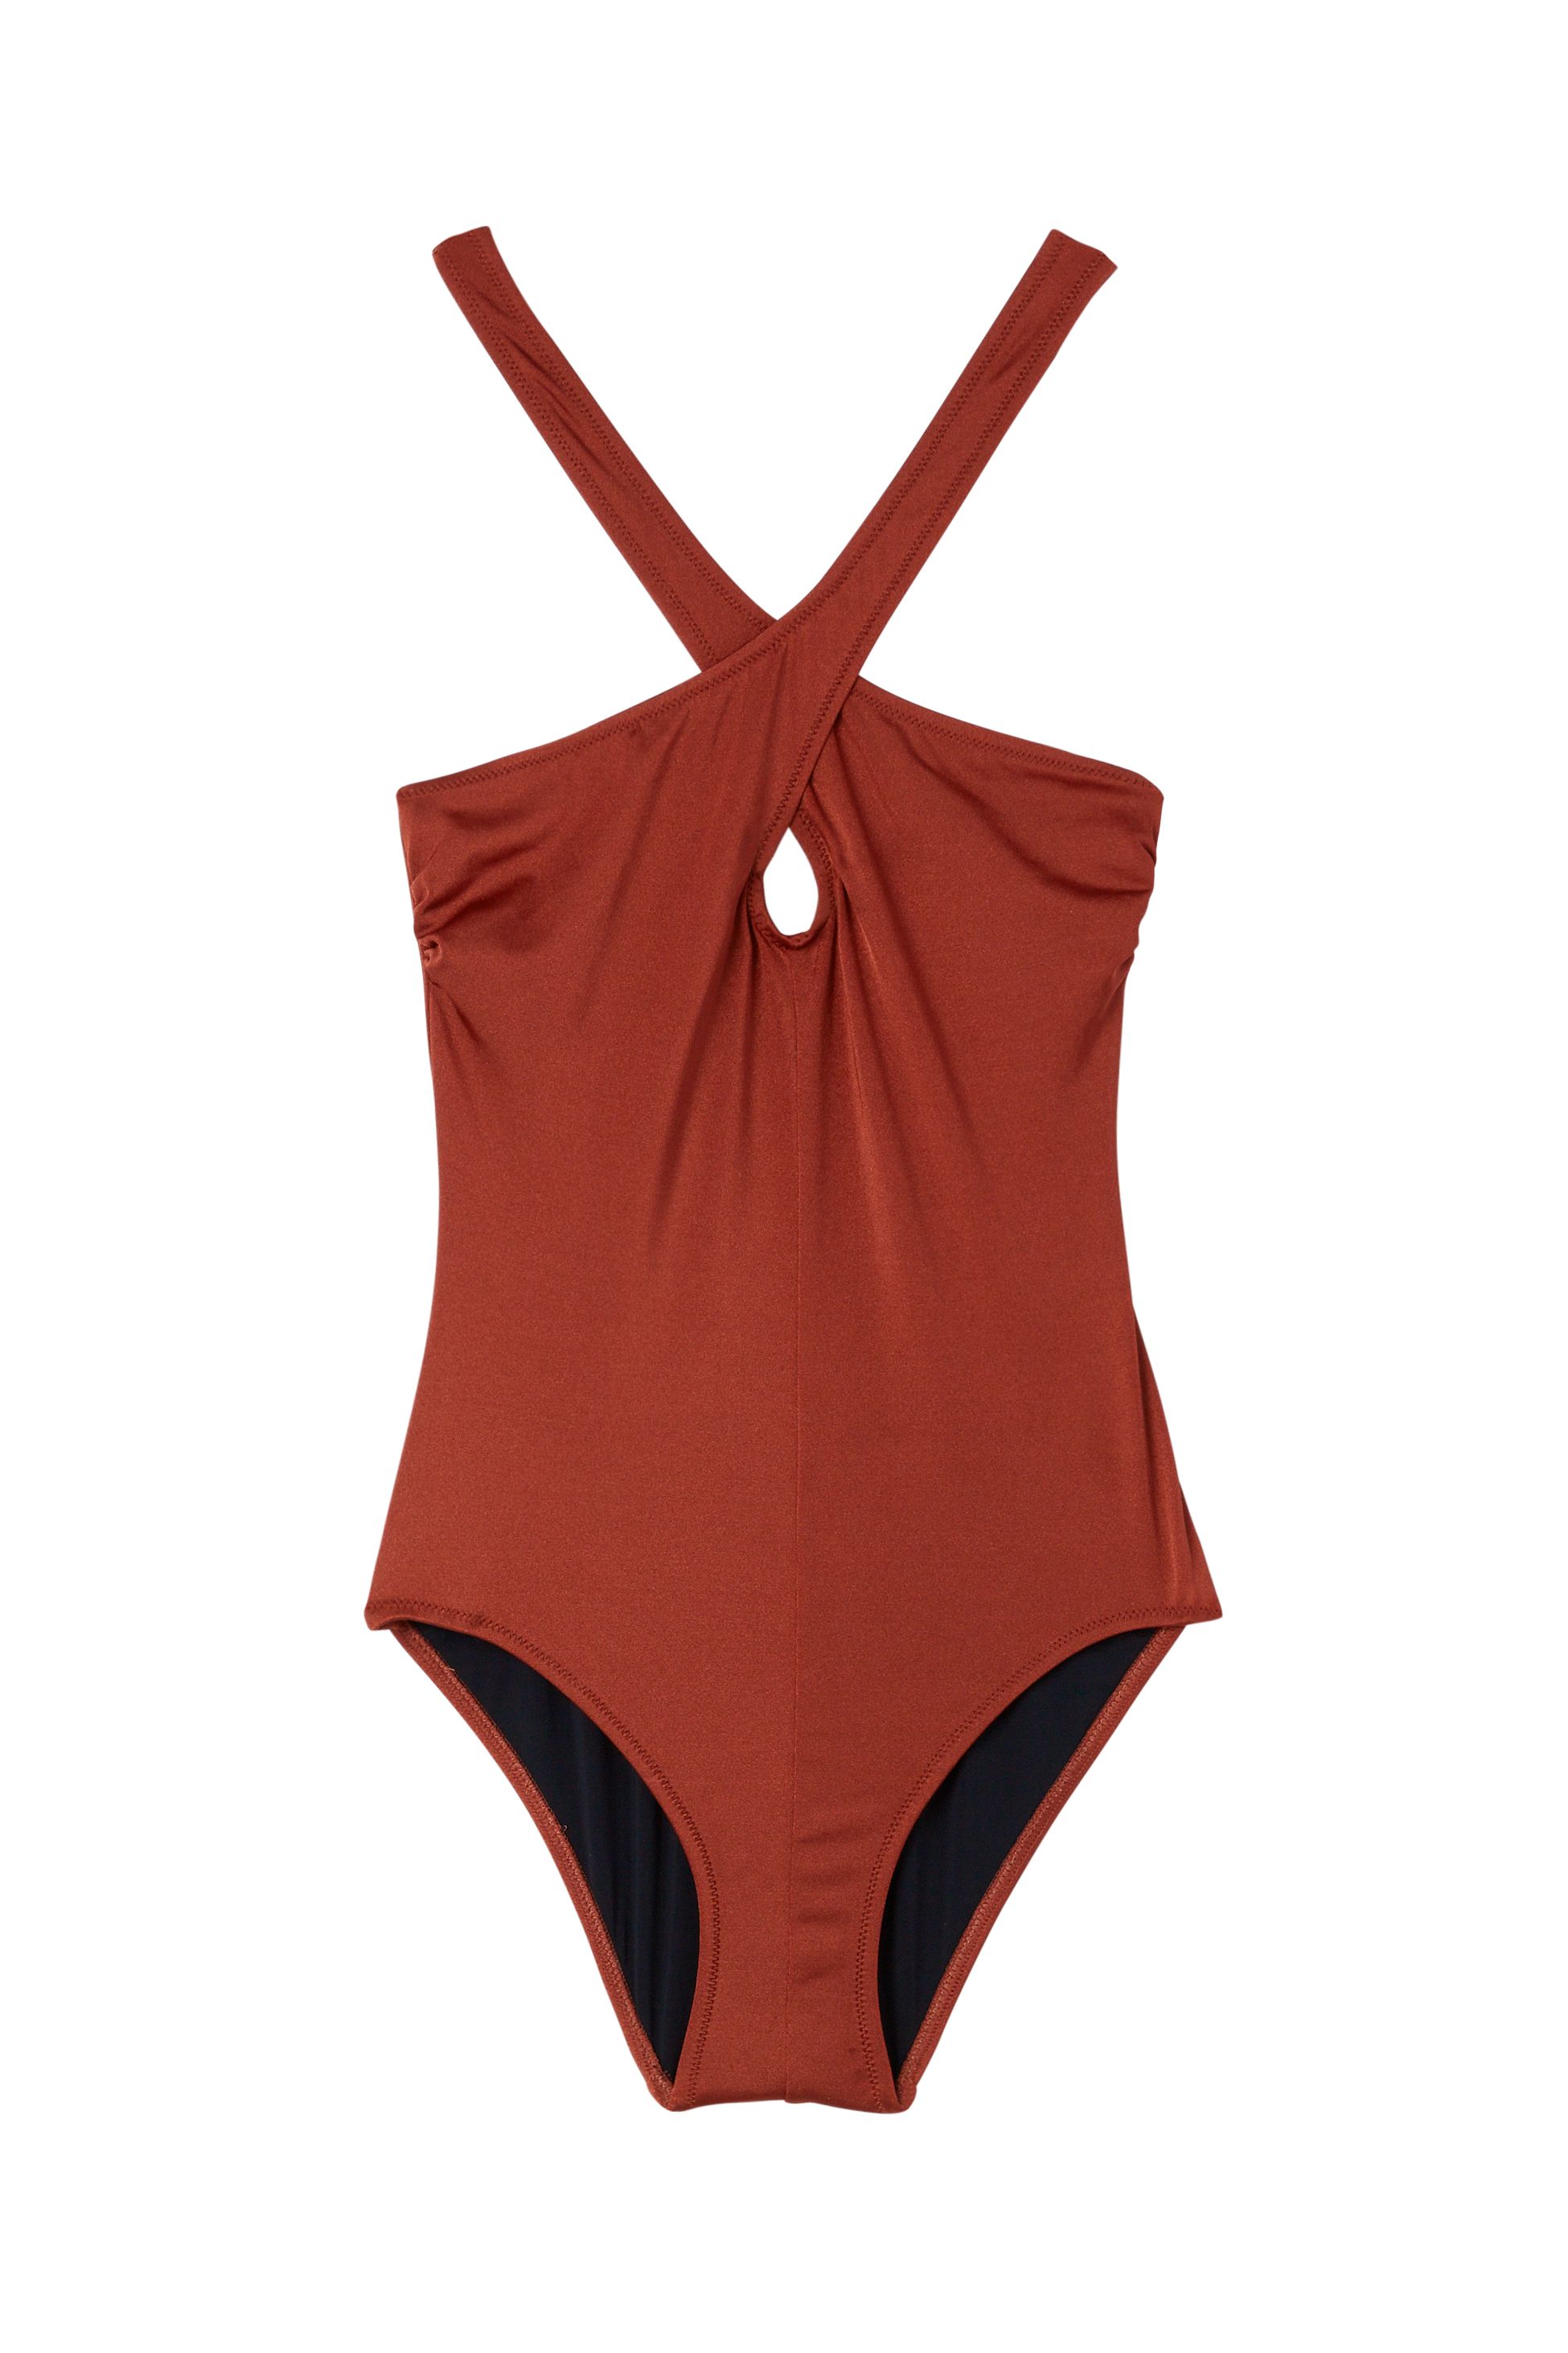 ECELEN New Summer Bathing Suits For Women Solid Color Striped